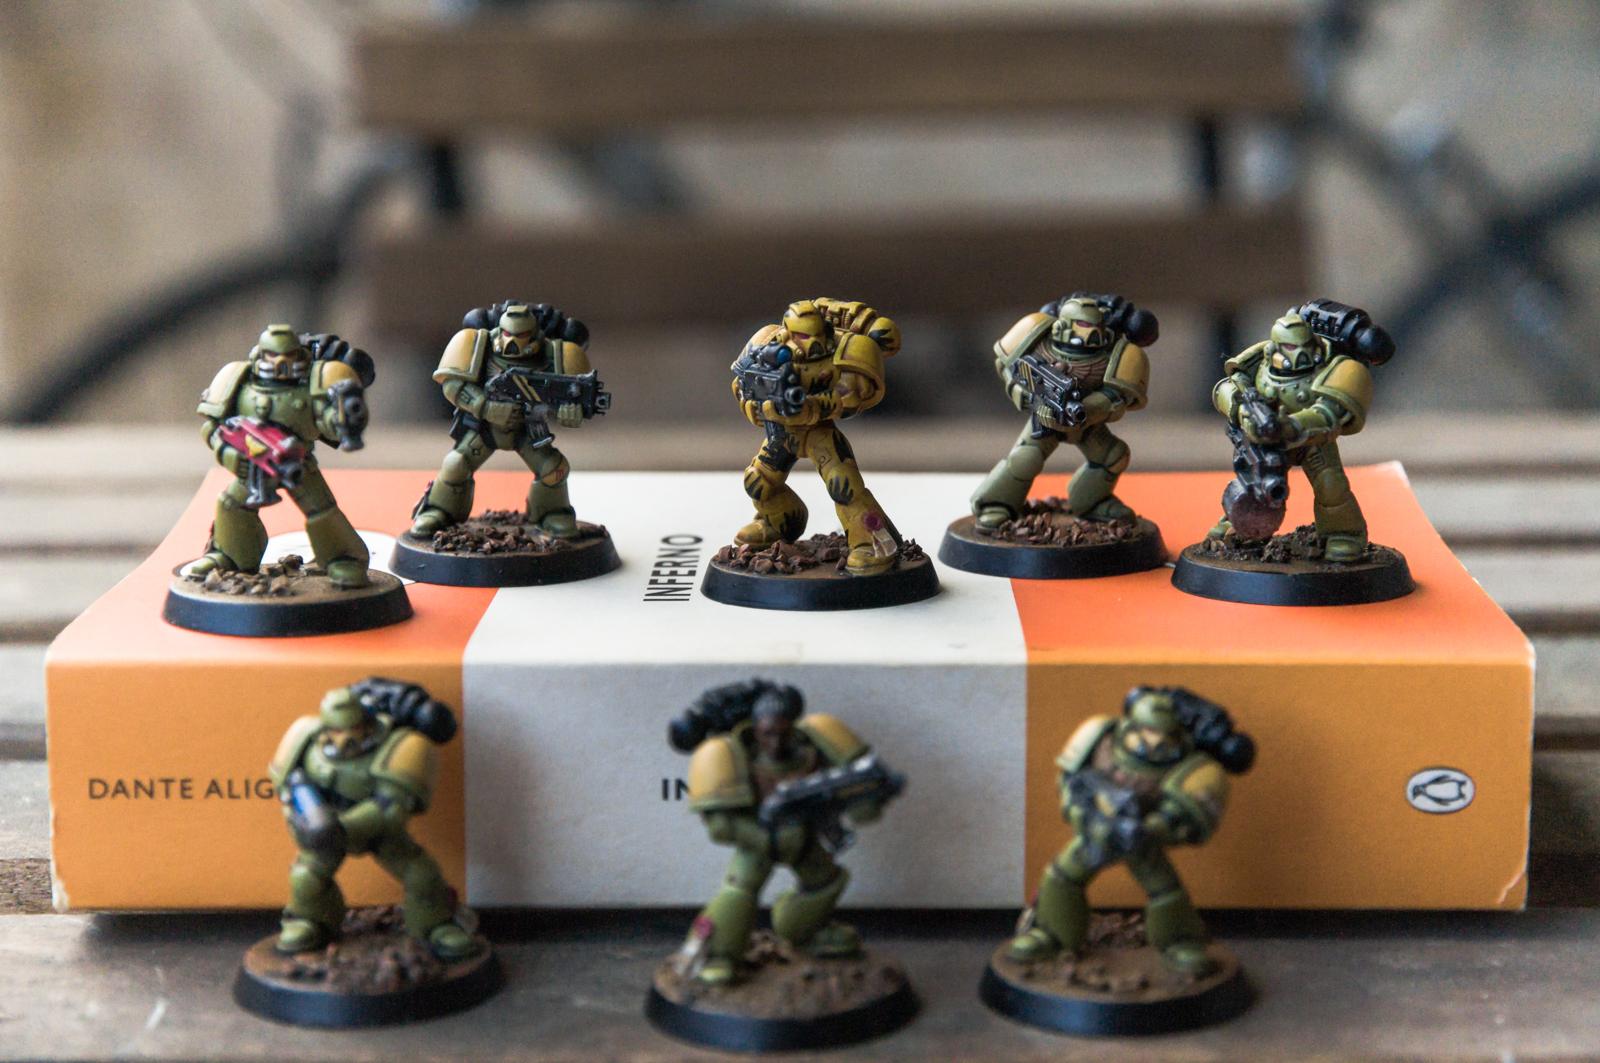 Camouflage, Heavy Bolter, Mantis Warriors, Plasma Guns, Space Marines, Tactical Squad, Tranquillity, Veteran Sergeant